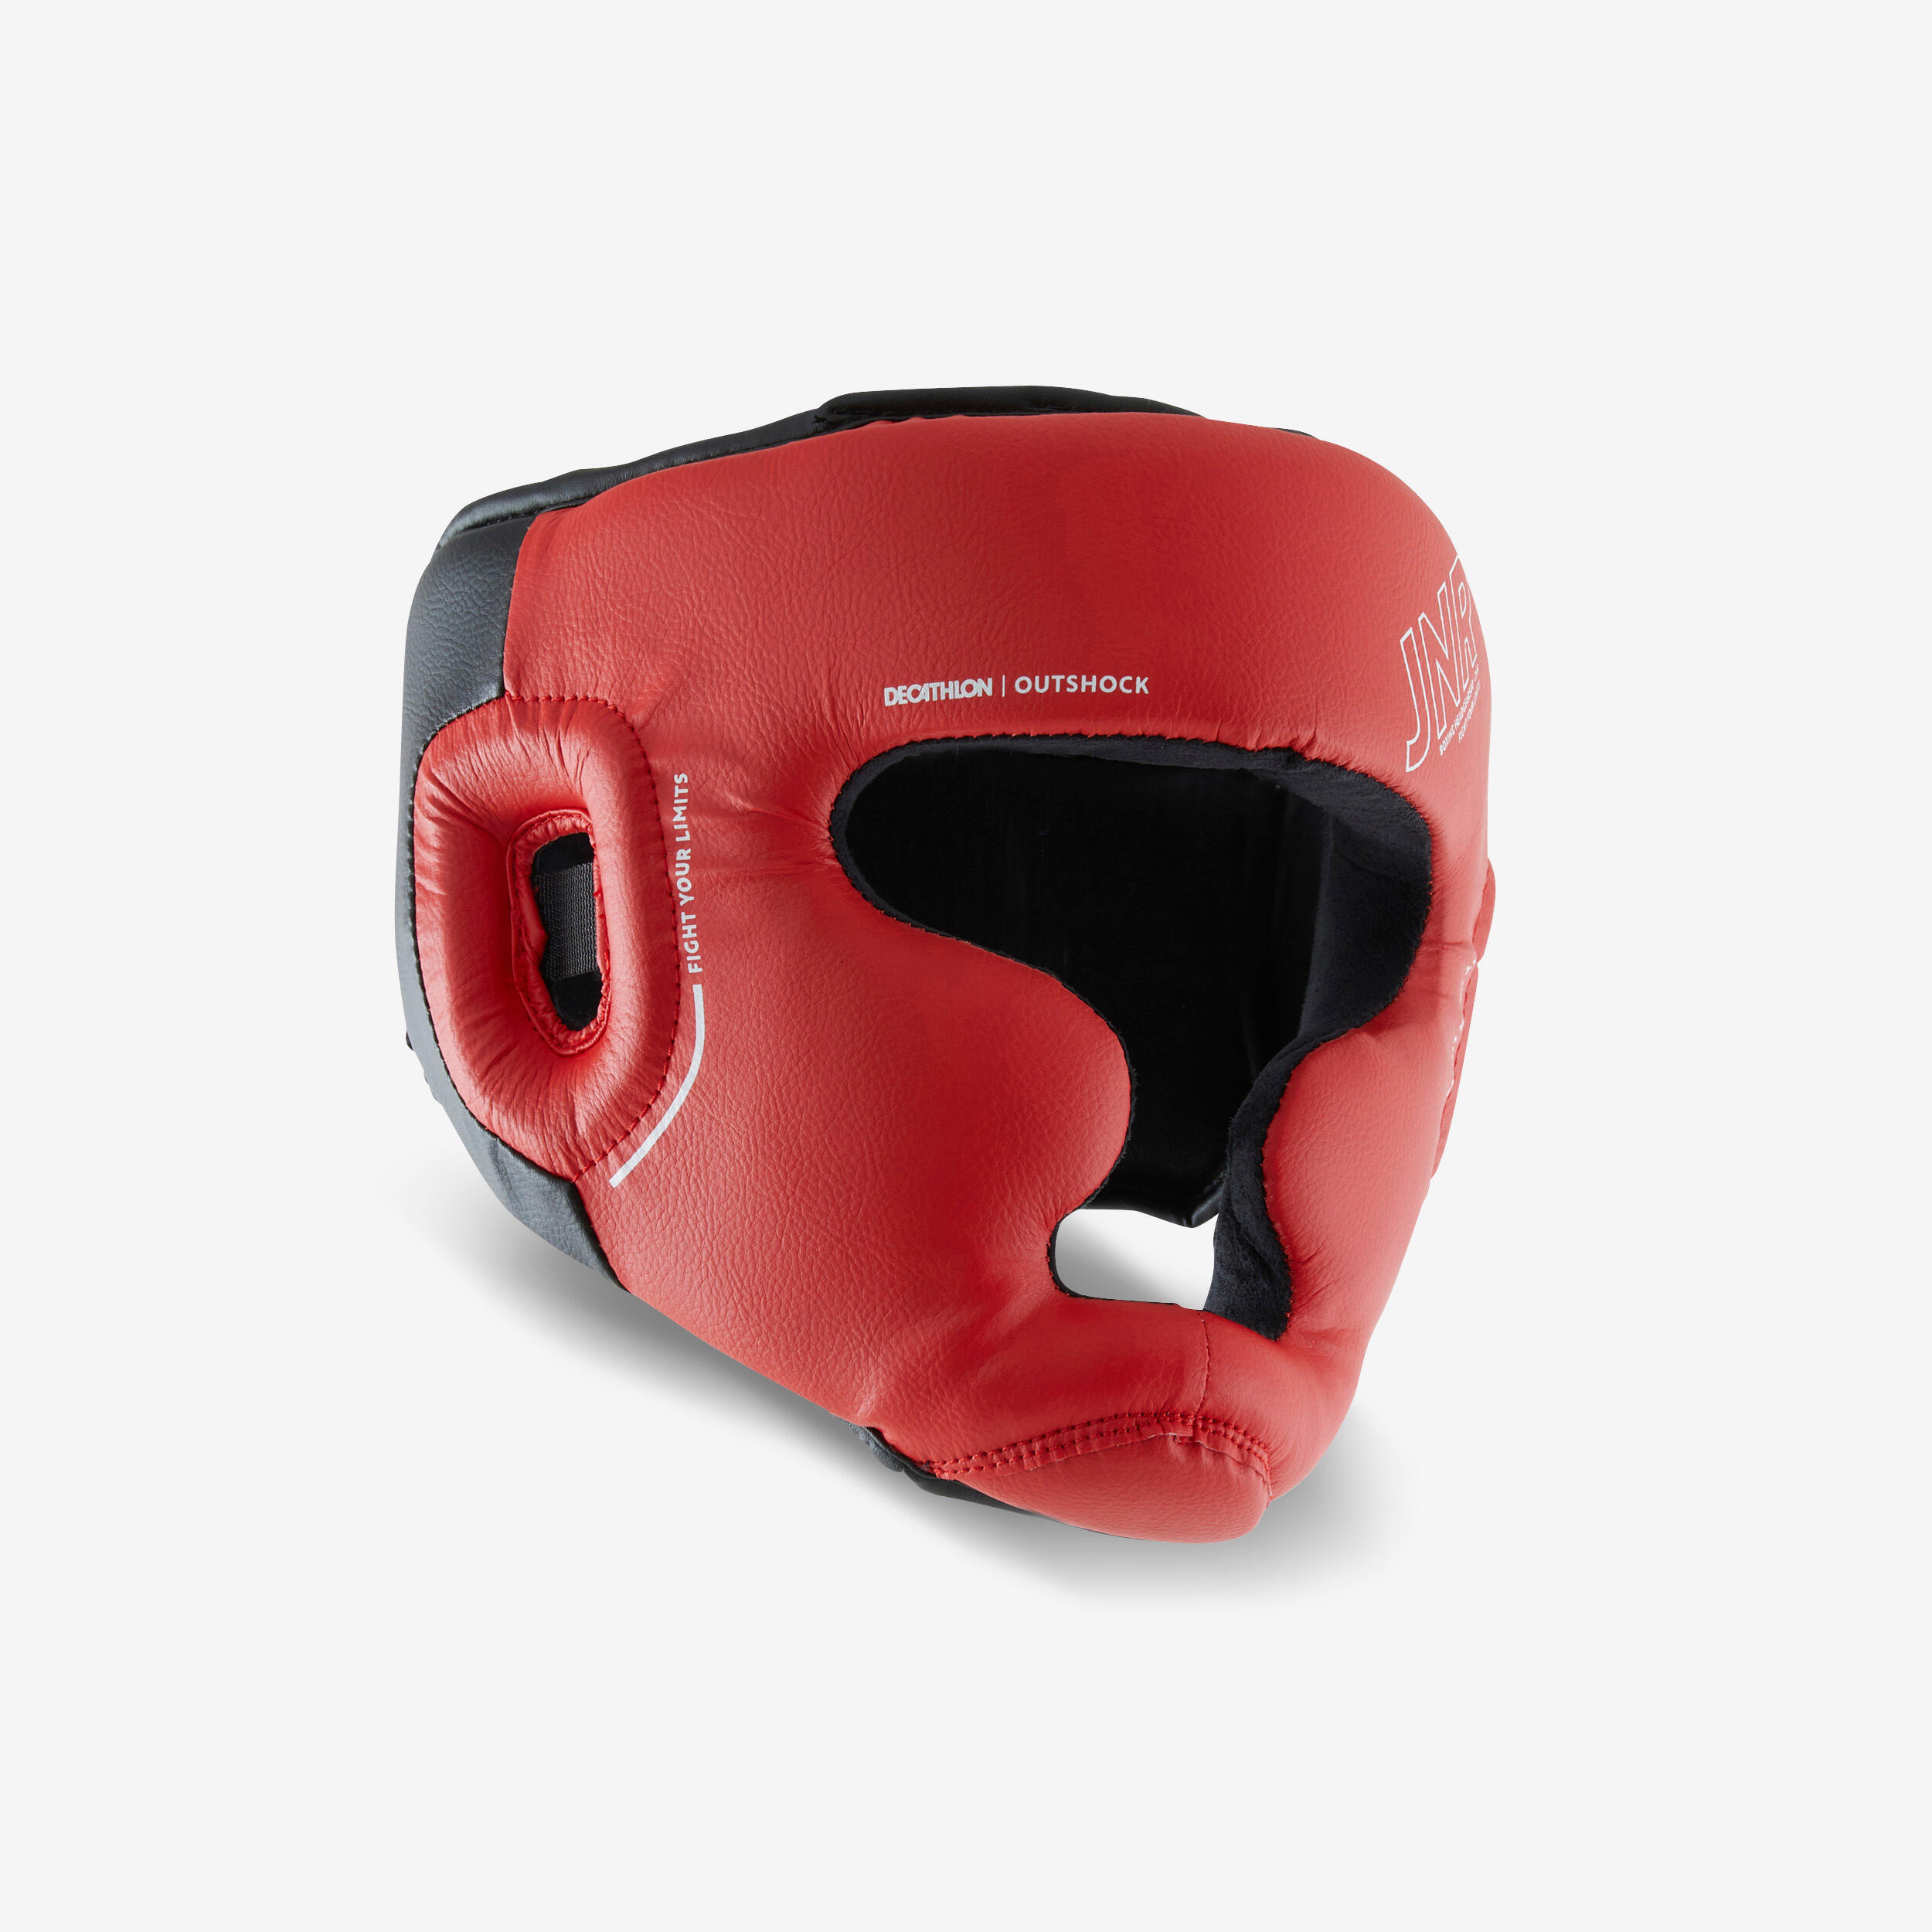 OUTSHOCK Kids' Boxing Full Face Headguard 500 - Red